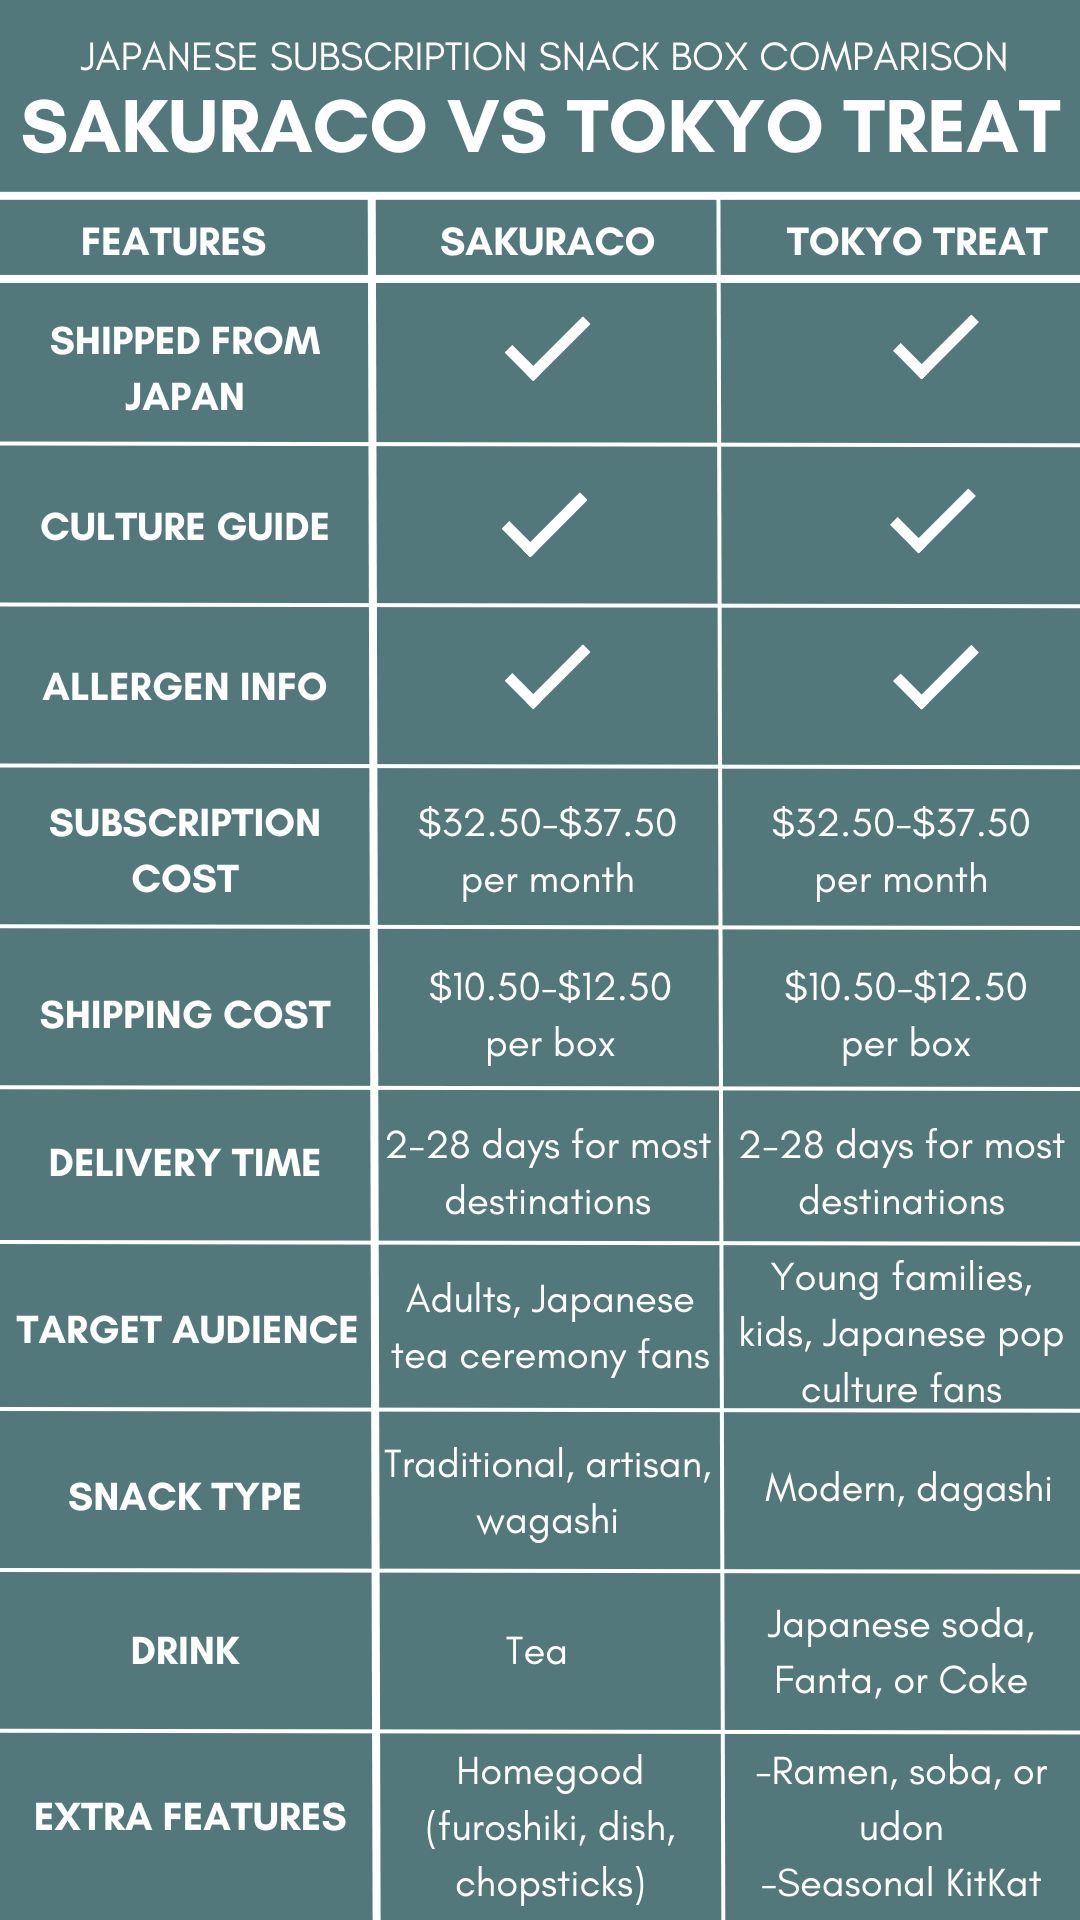 An infographic comparing Sakuraco vs Tokyo Treat features.
Sakuraco: ships from Japan, has culture guide, includes allergen info. Subscription cost: $32.50-$37.50 per month, shipping cost: $10.50-$12.50 per box, delivery time: 2-28 days for most destinations. Target audience: adults, Japanese tea ceremony fans. Snack type: traditional, artisan, wagashi. Drink: tea. Extra features: home good (furoshiki, dish, chopstick).
Tokyo Treat: shipped from Japan, has culture guide, includes allergen info. Subscription cost: $32.50-$37.50 per month, shipping cost: $10.50-$12.50 per box, delivery time: 2-28 days for most destinations. Target audience: young families, kids, Japanese pop culture fans. Snack type: modern, dagashi. Drink: Japanese soda, Fanta, or Coke. Extra features: ramen, soda or udon; and seasonal KitKat